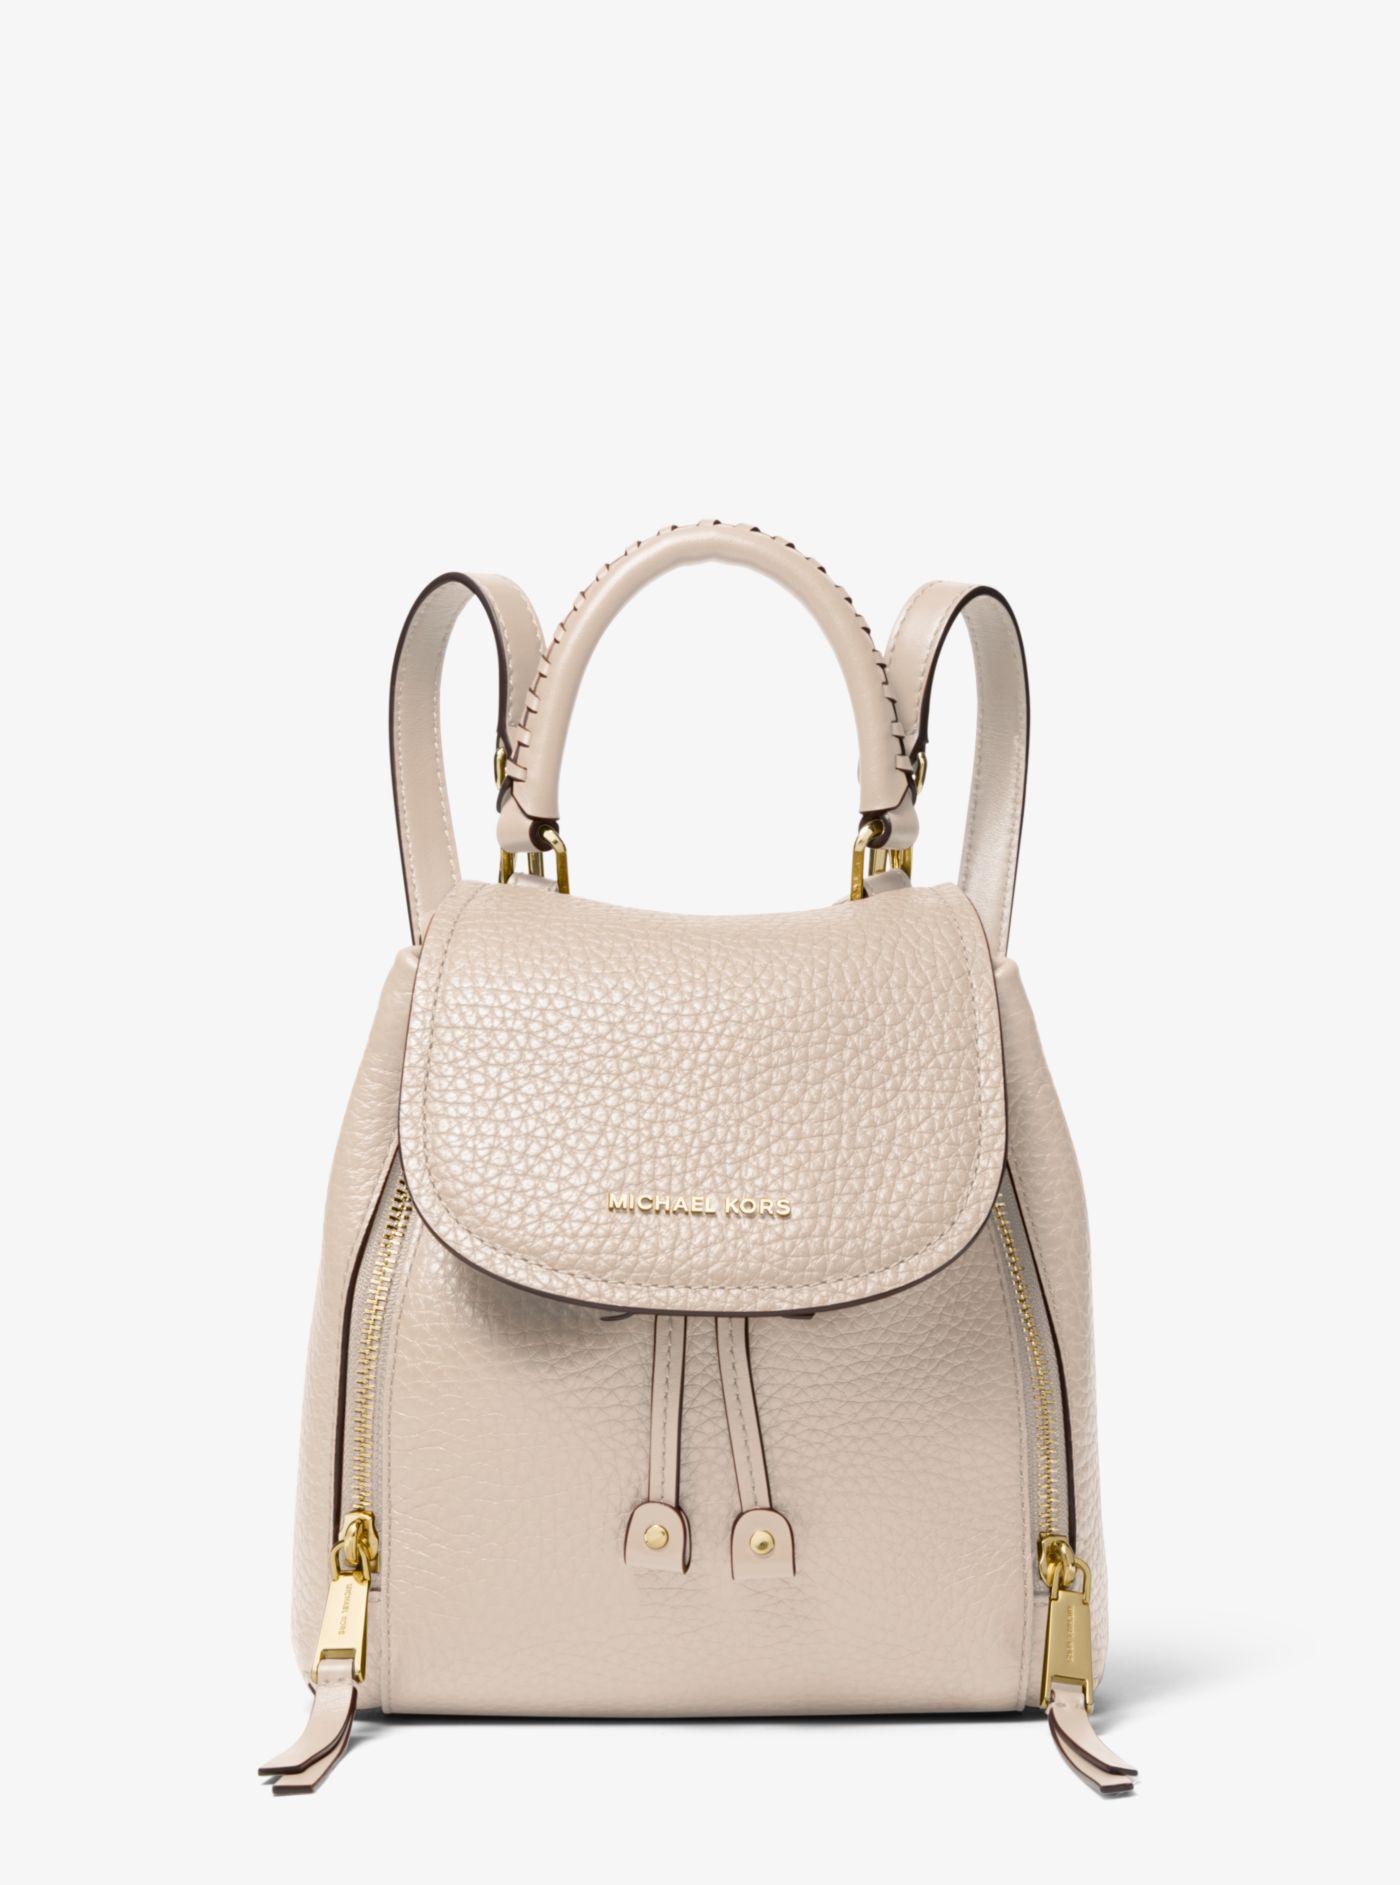 Michael Kors Viv Extra-small Pebbled Leather Backpack in Natural | Lyst